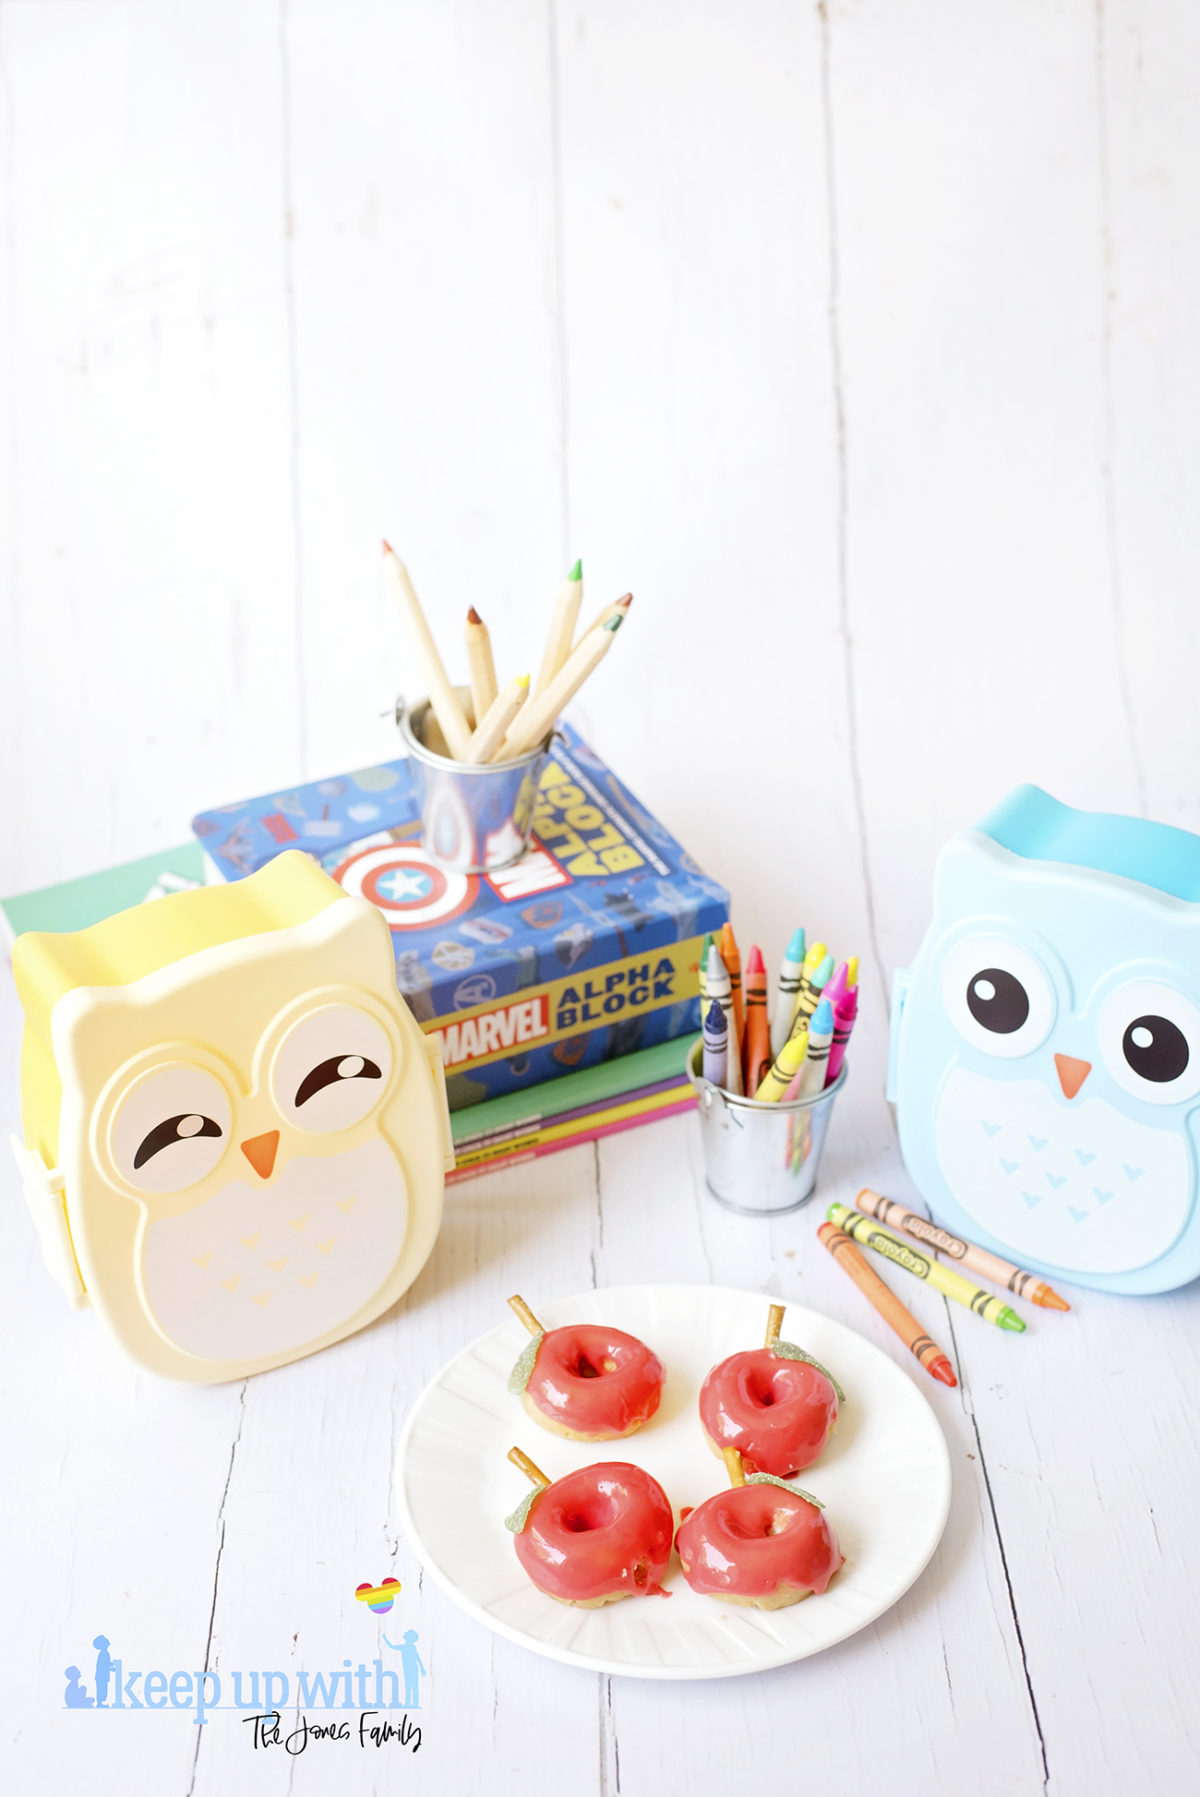 Image shows Back to School Doughnuts on a white Vera Wang plate, sitting on a white wooden surface. There are small owl shaped bento boxes and books in the background, along with a bucket of crayola crayons. Image by Sara-Jayne from Keep Up With The Jones Family.